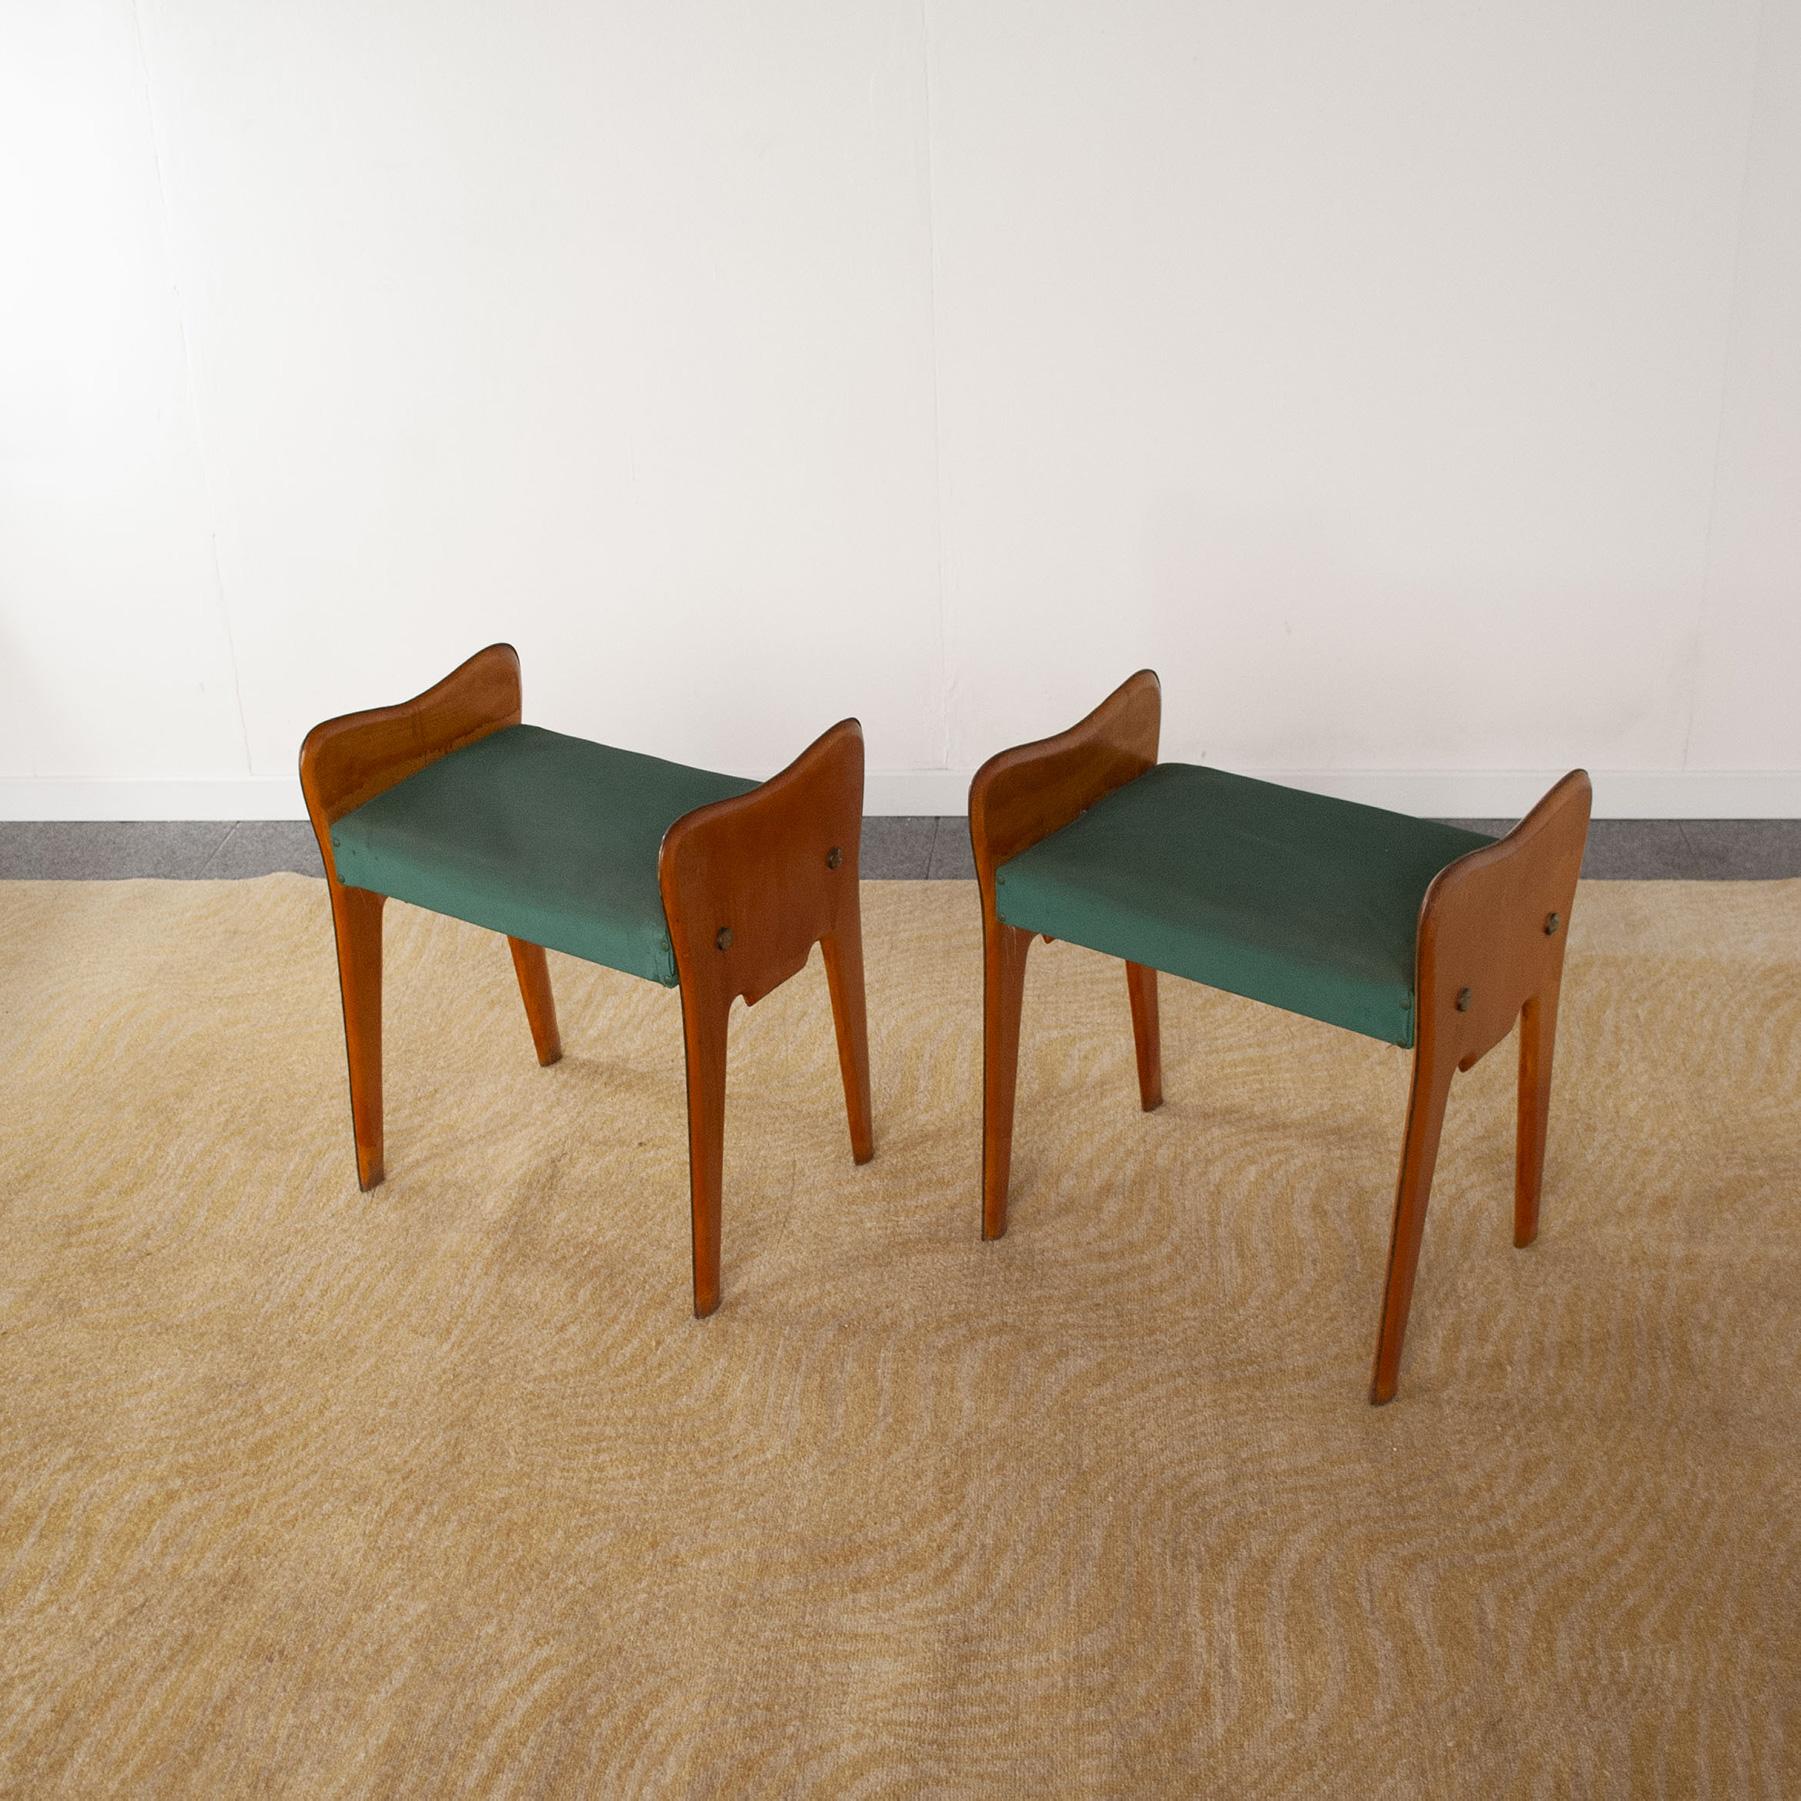 Italian Mid-Century Pair of Wooden Benches from the 1950s In Good Condition For Sale In bari, IT